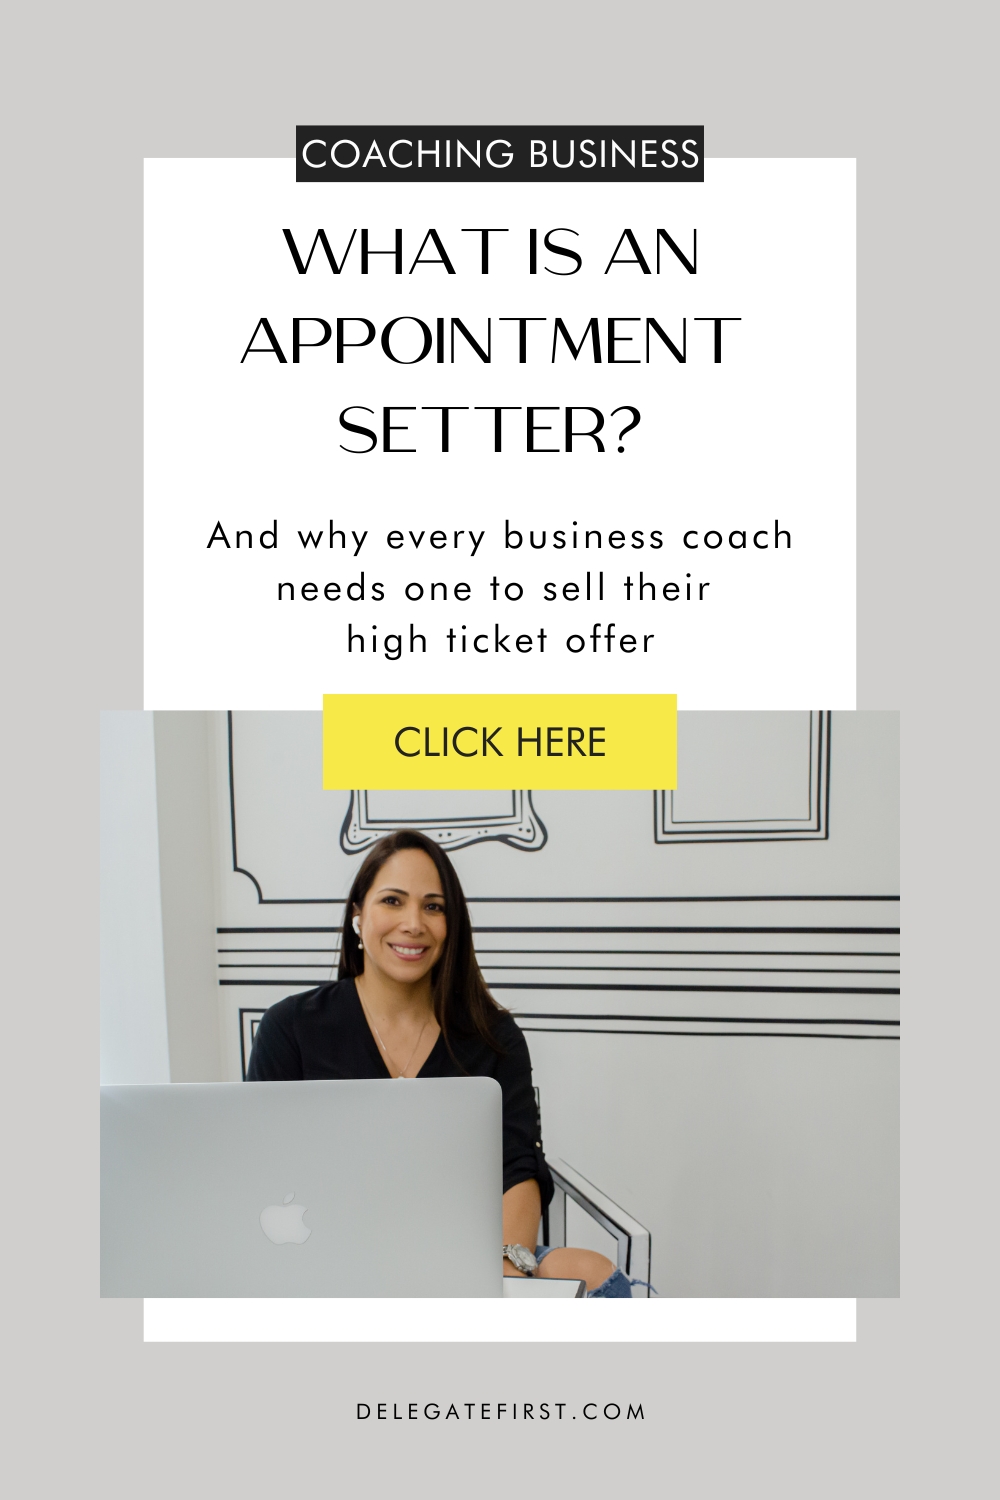 What is an appointment setter